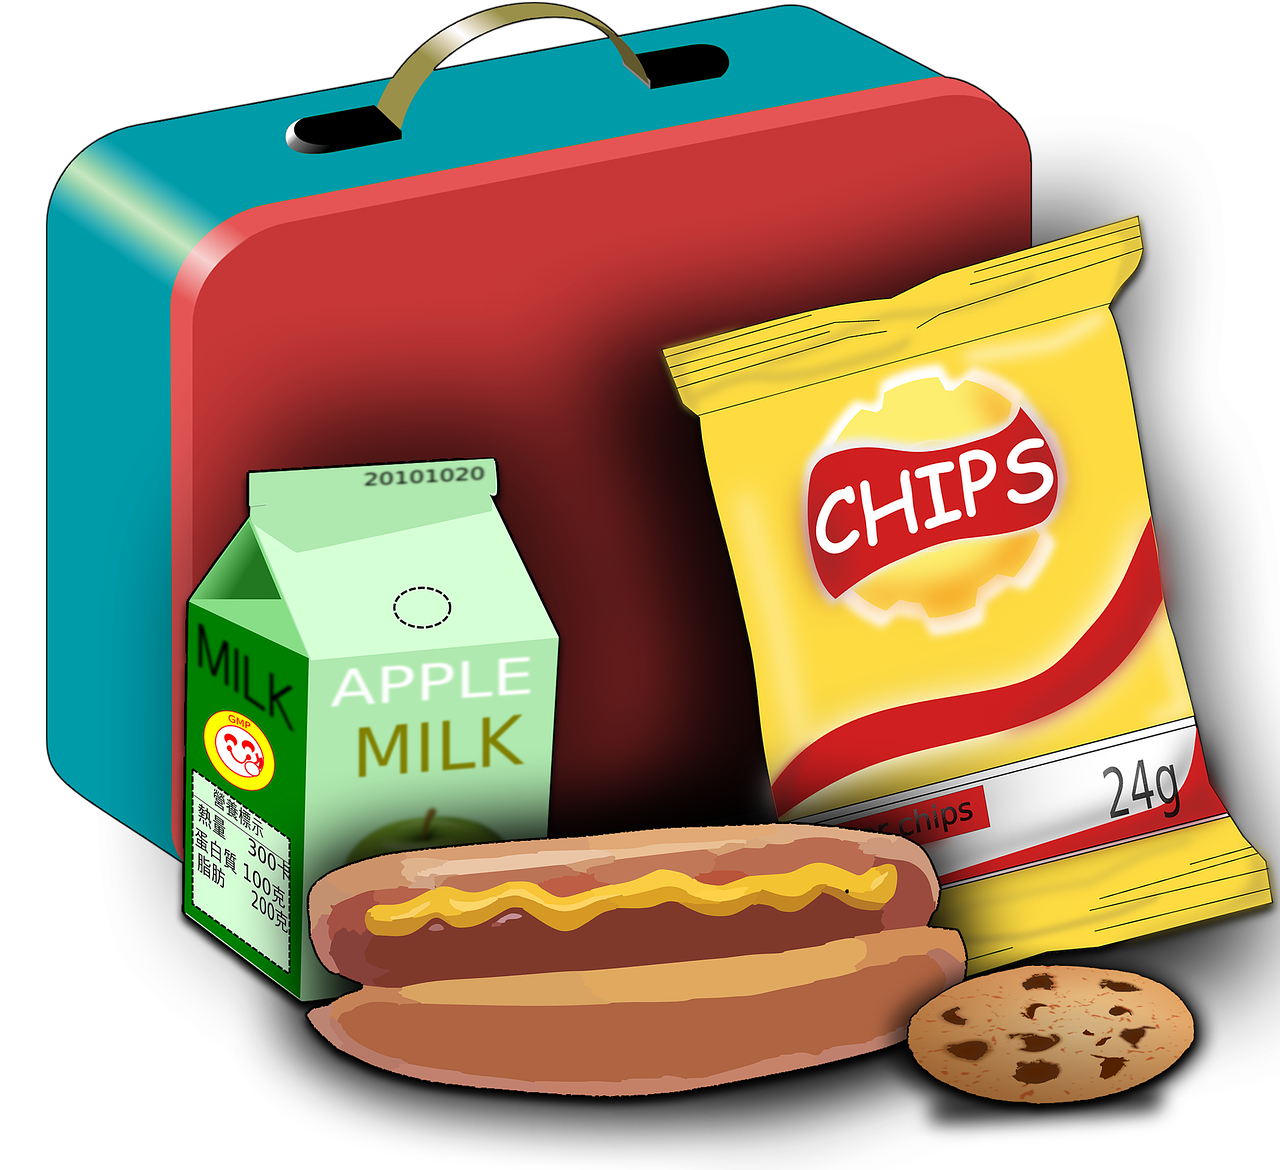 lunch box with milk, chips, and hot dog